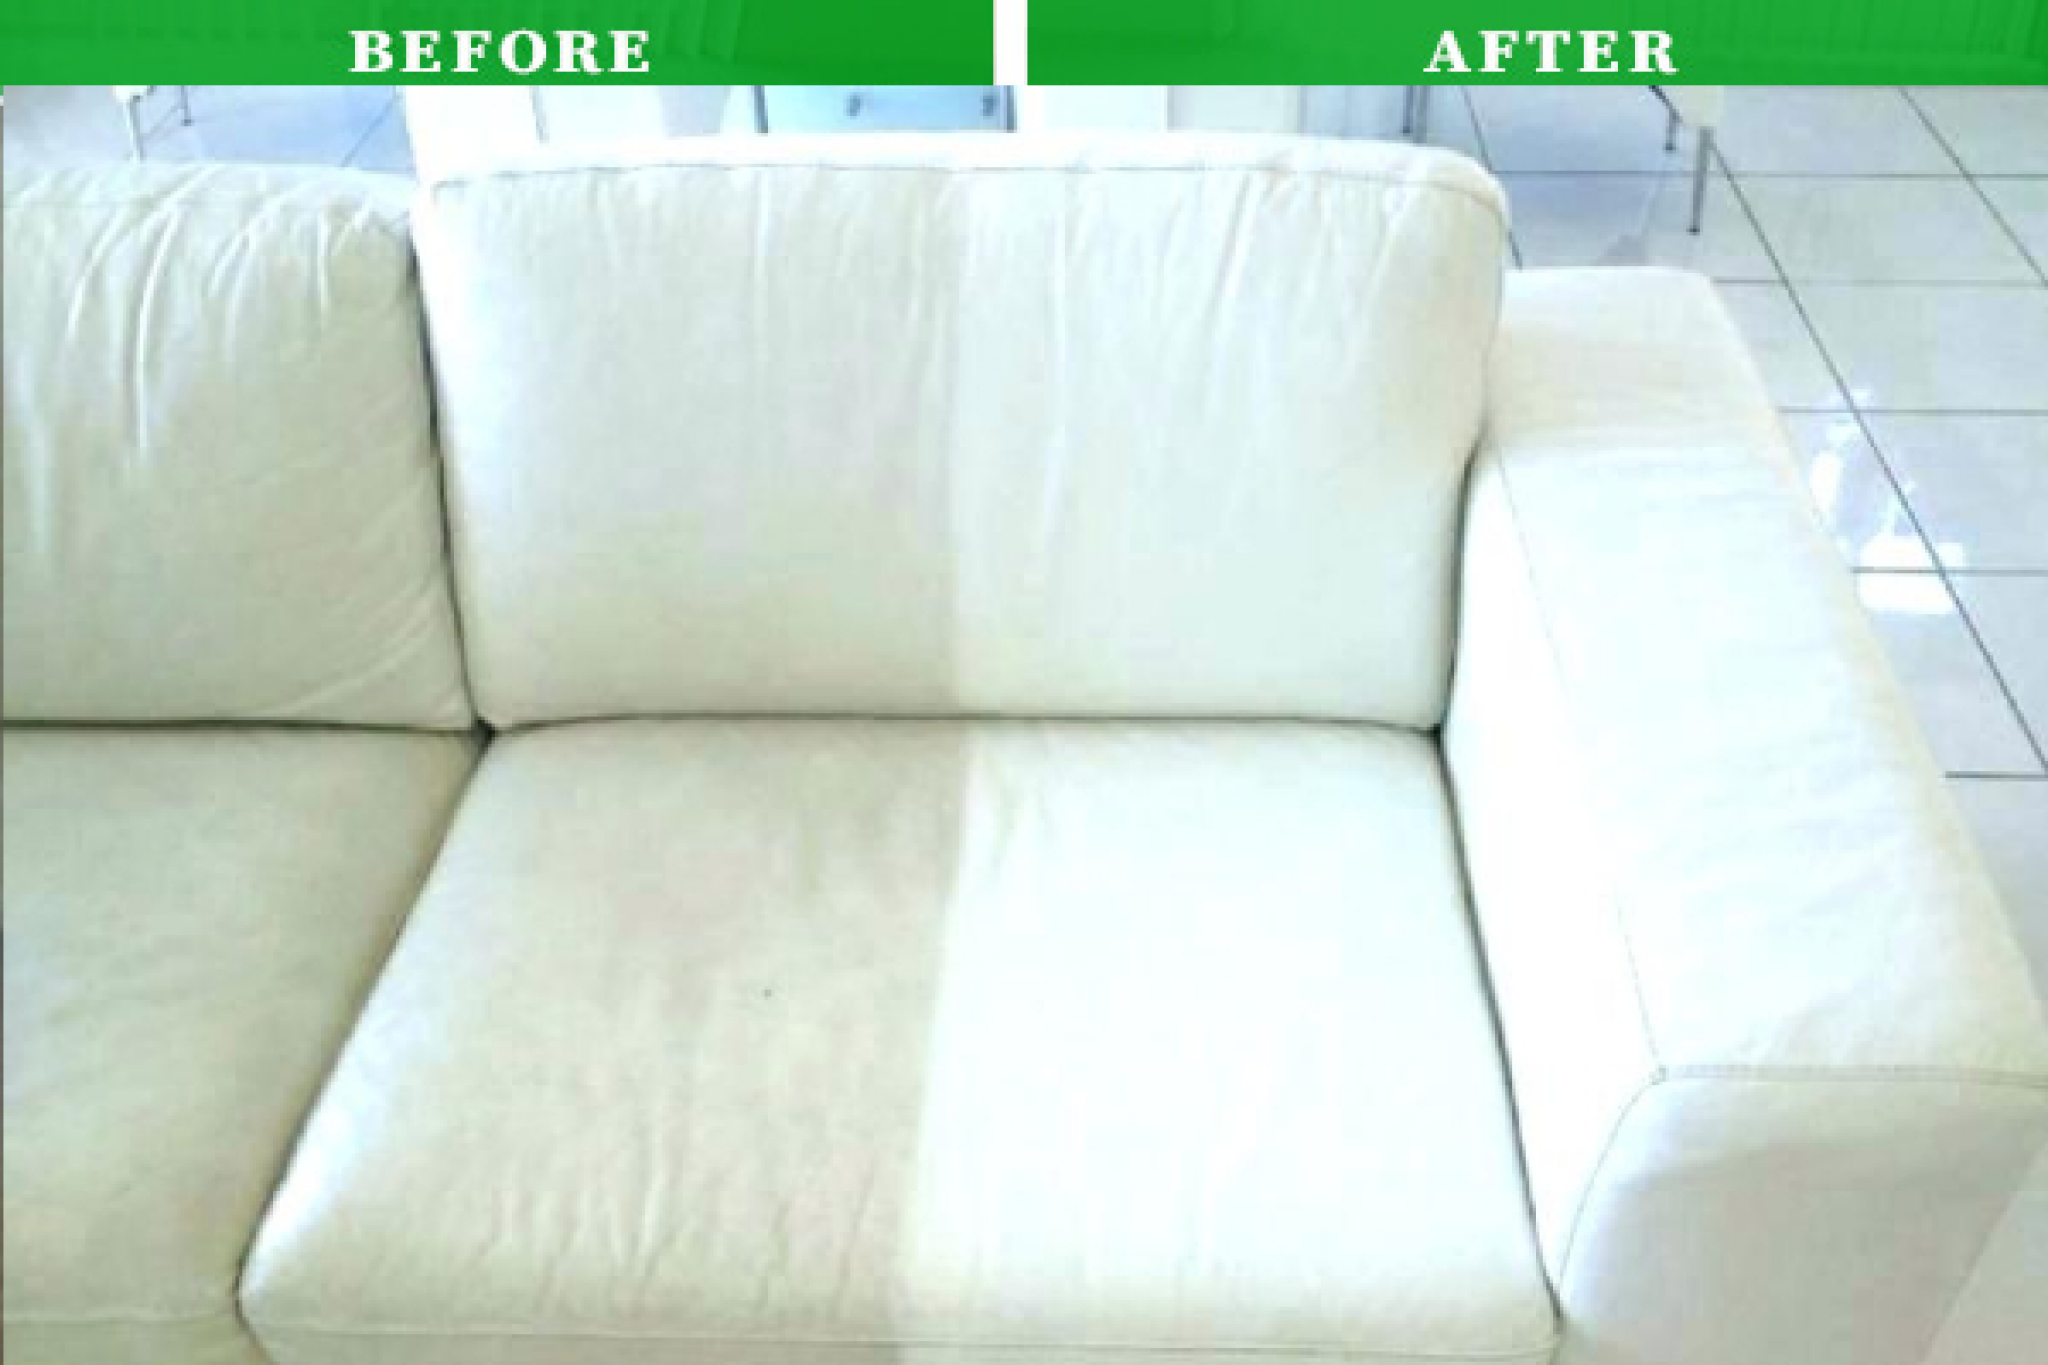 What is the best way to clean a leather sofa